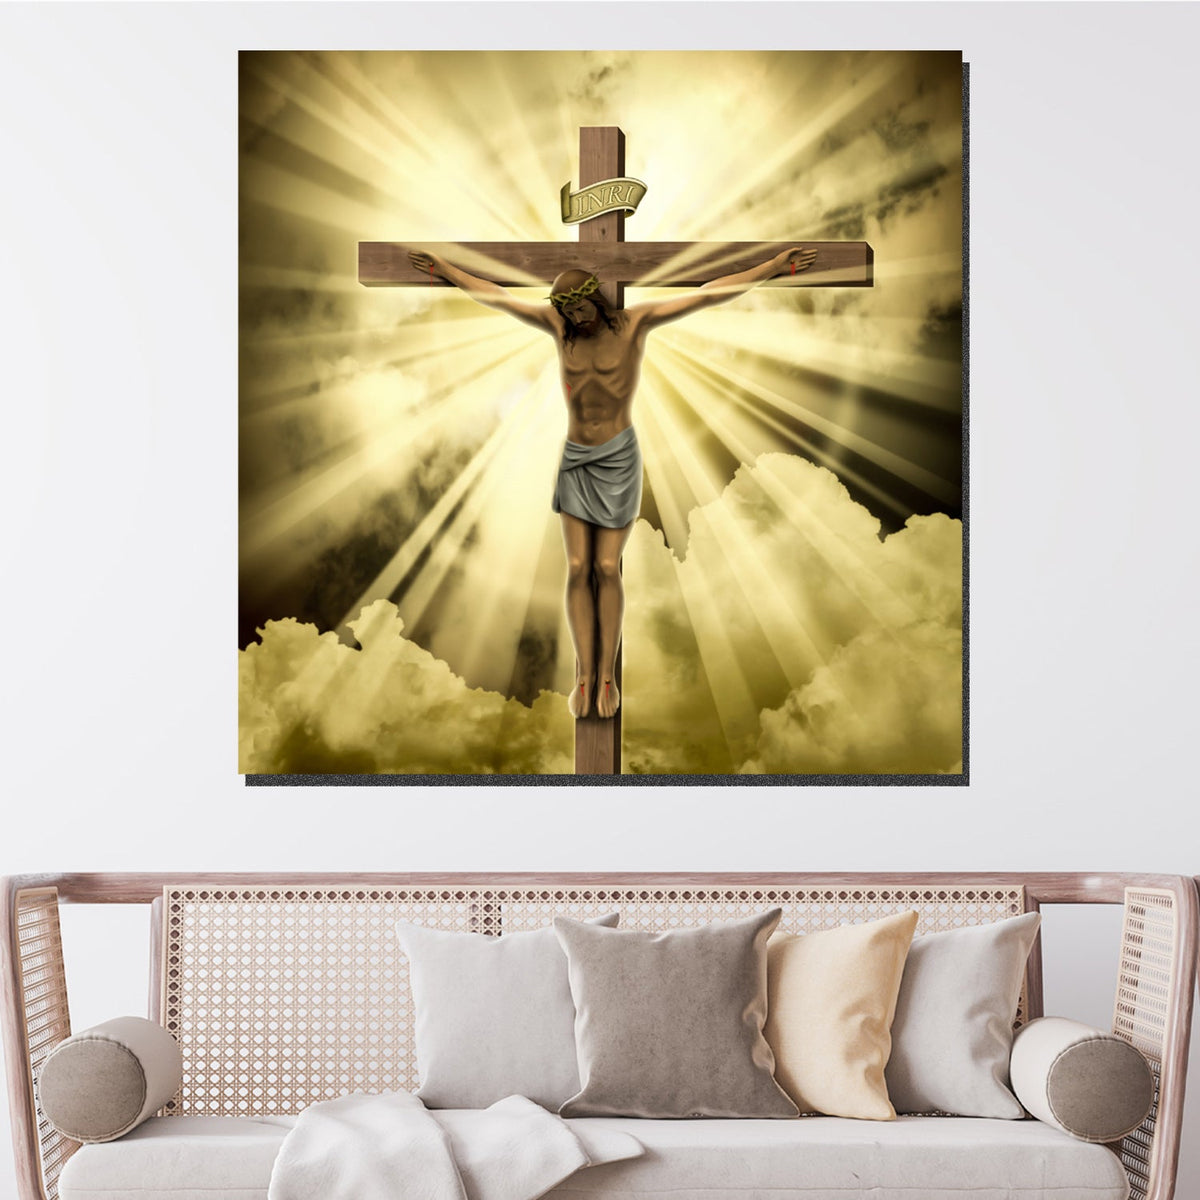 https://cdn.shopify.com/s/files/1/0387/9986/8044/products/JesusINRICanvasArtprintStretched-1.jpg